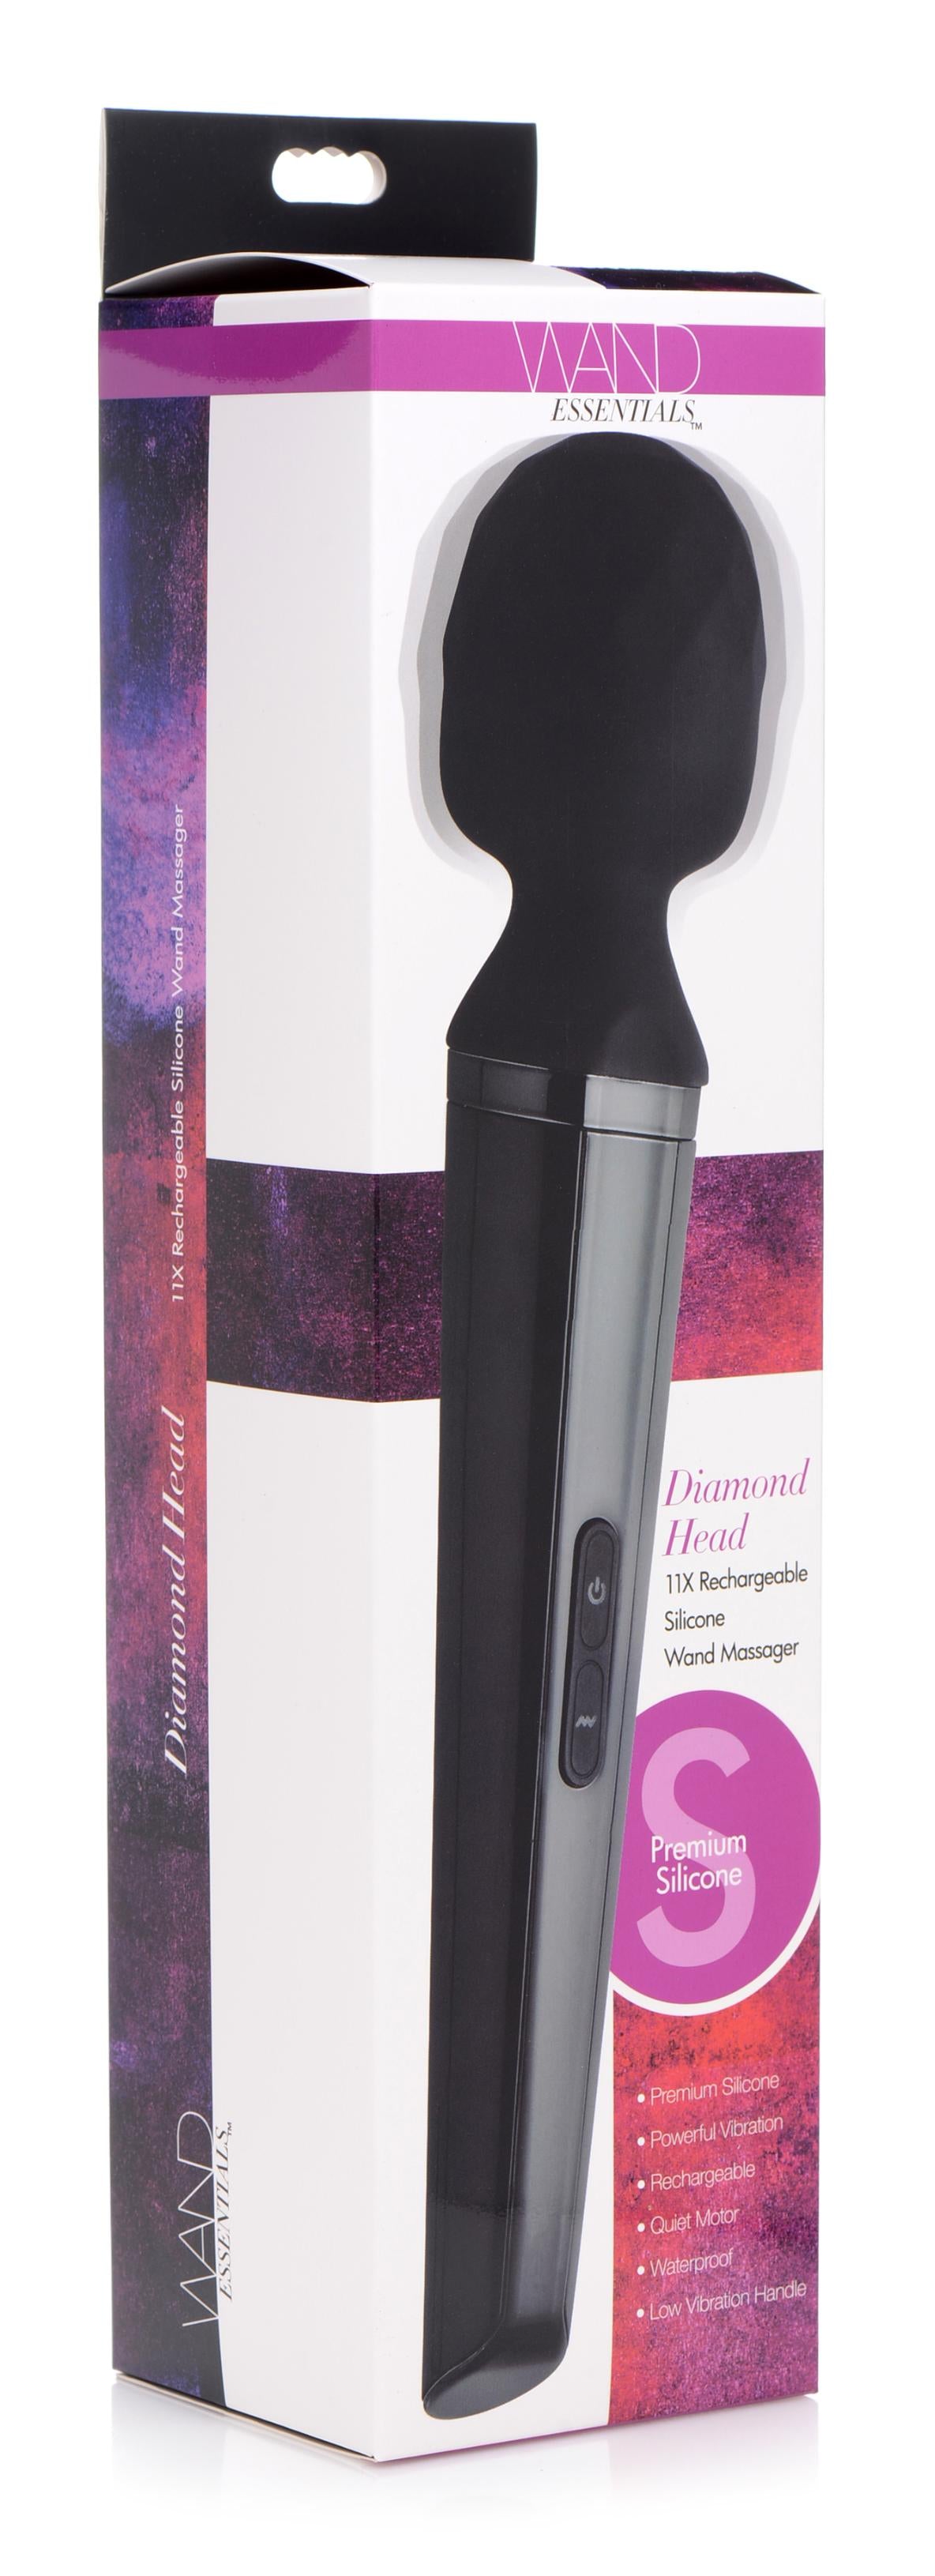 Diamond Head 24X Rechargeable Silicone Wand Massager